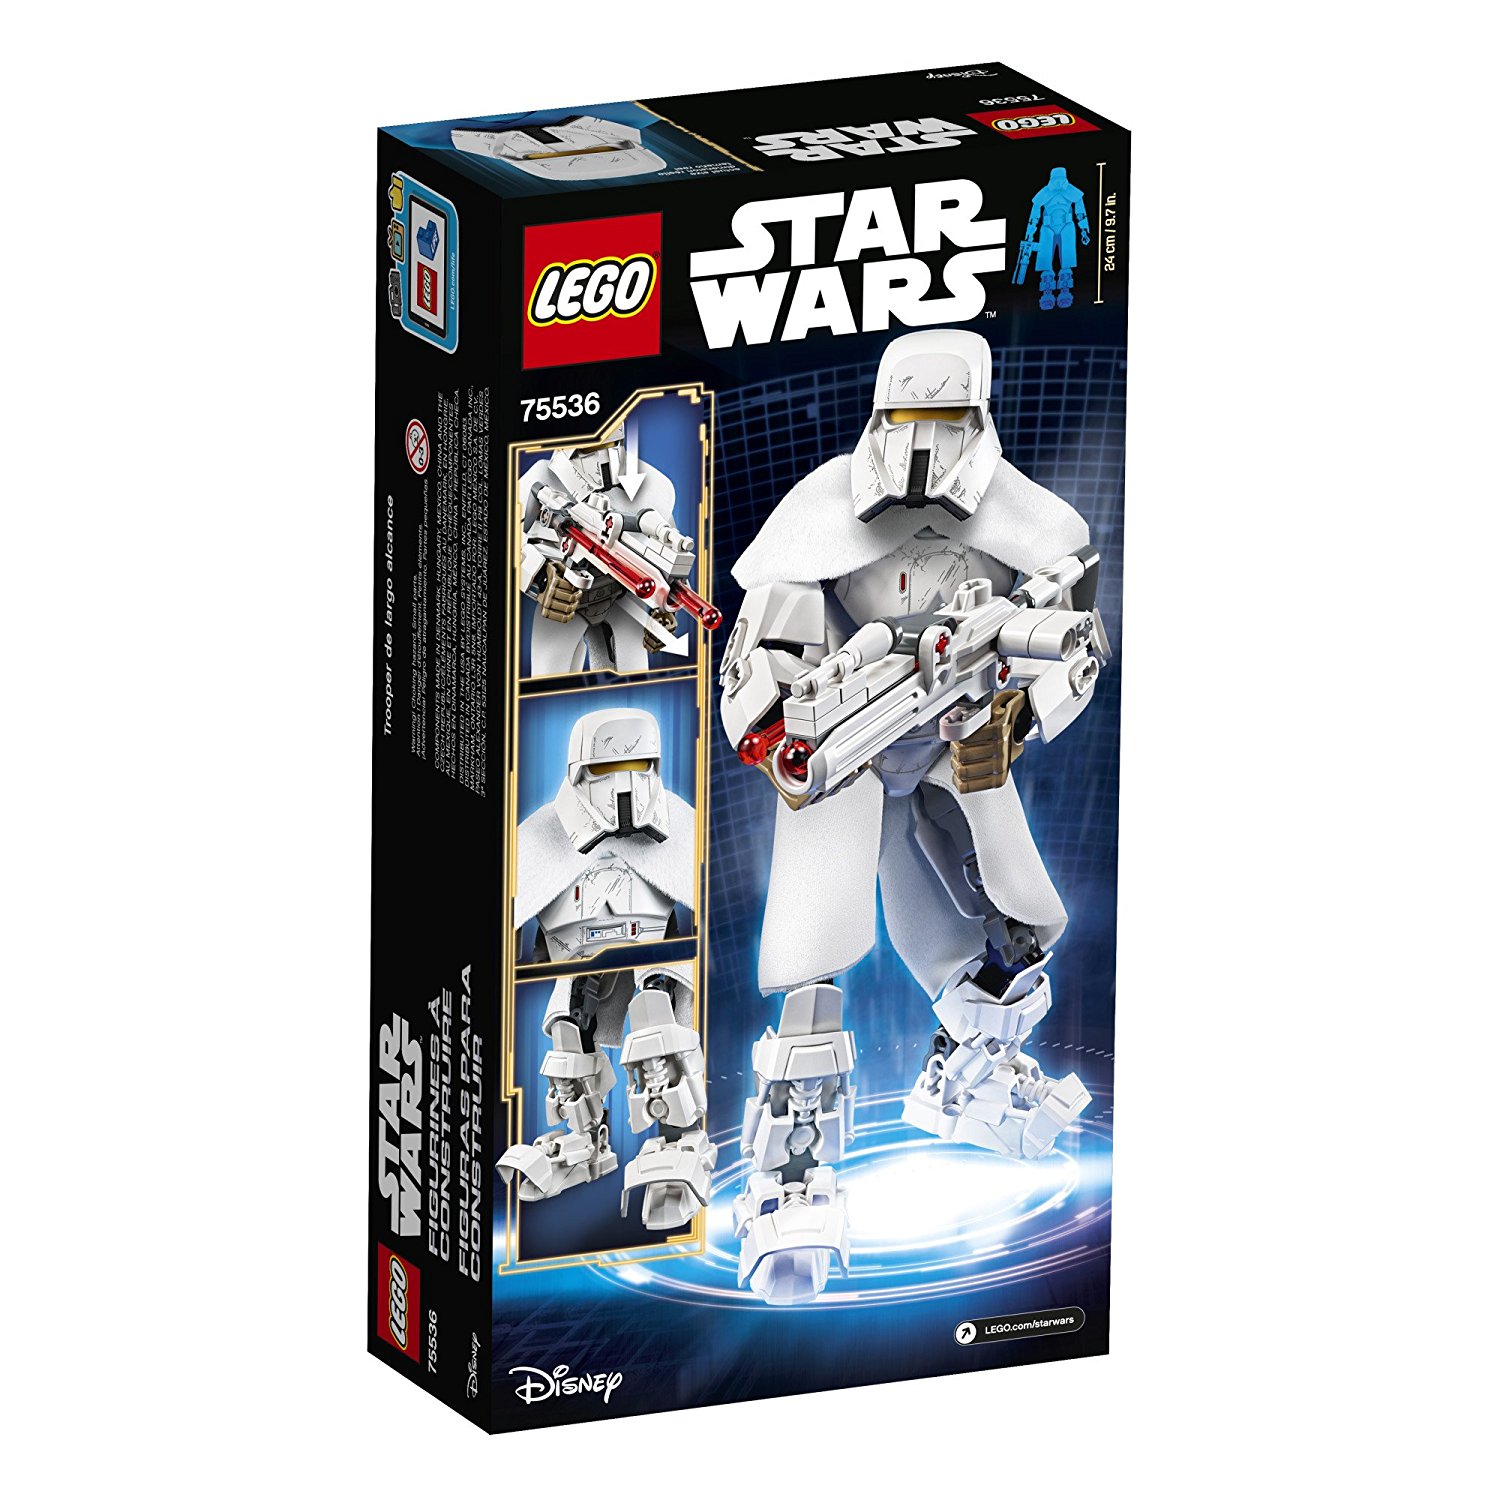 Solo: ASWS Lego Imperial Range Trooper Buildable Figure 2